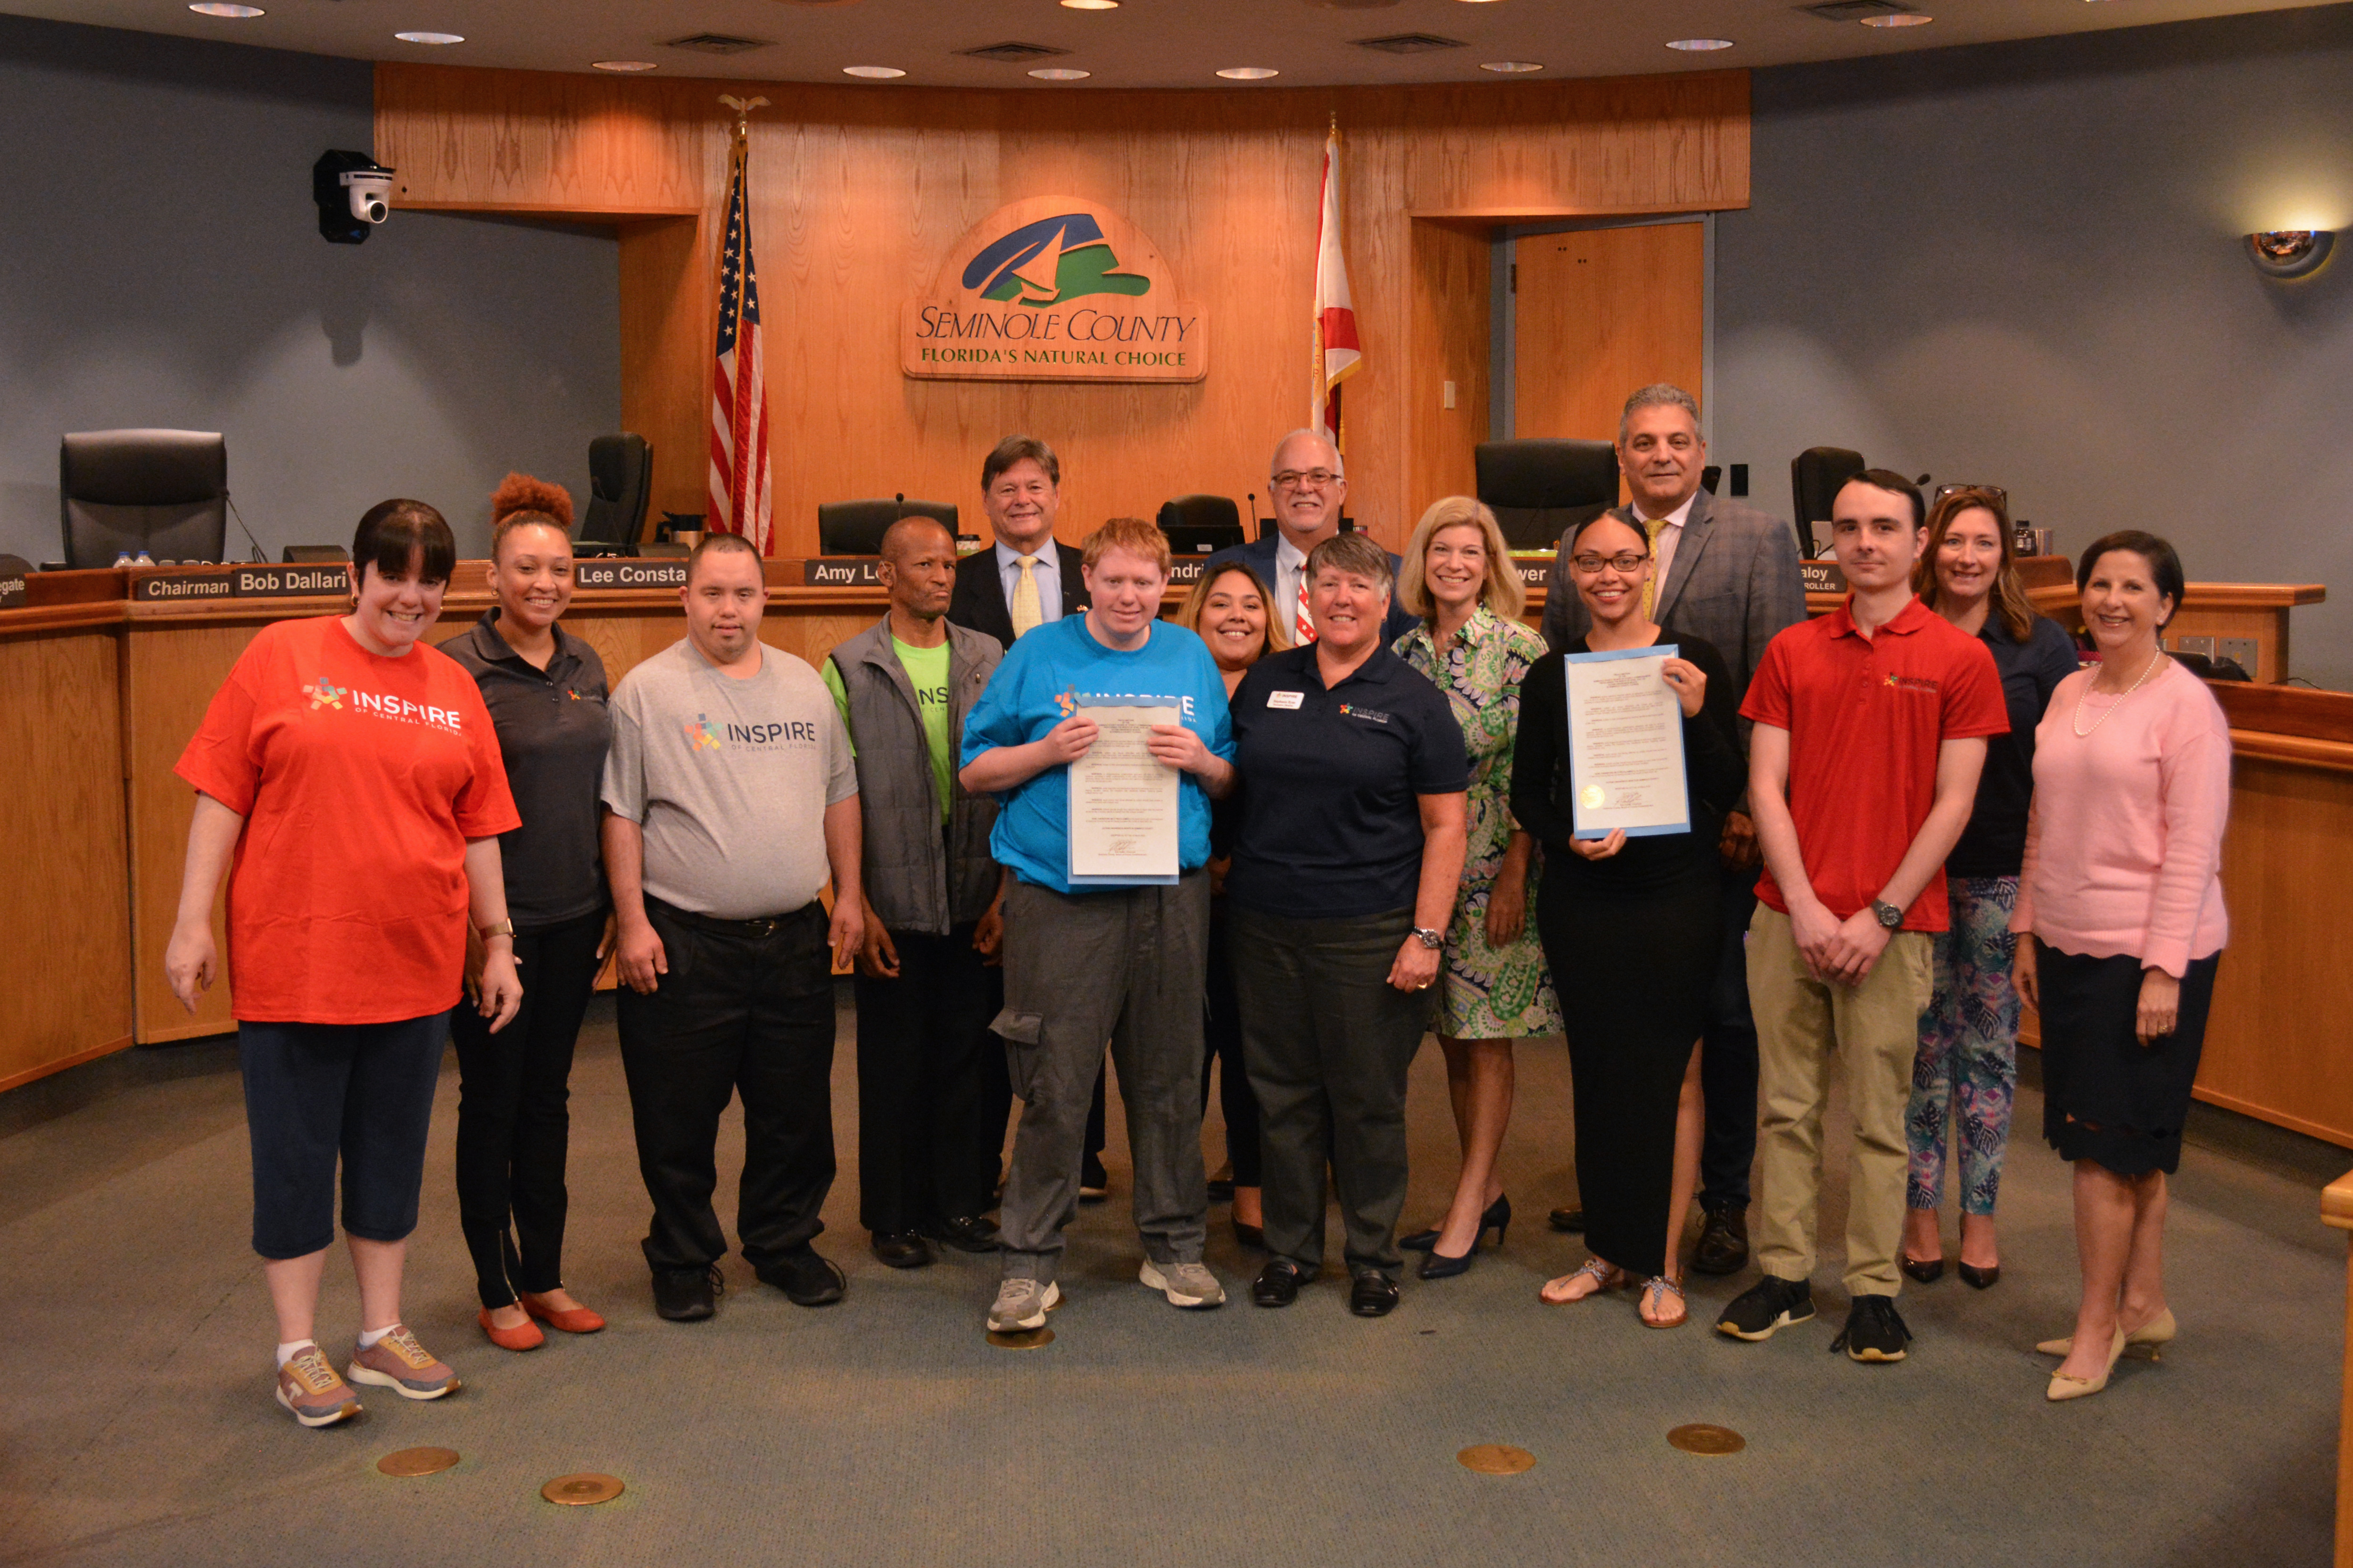 Proclamation — Proclaiming April as Autism Awareness Month in Seminole County. (Chip Byers, The Able Trust Florida Endowment Foundation for Vocational Rehabilitation)